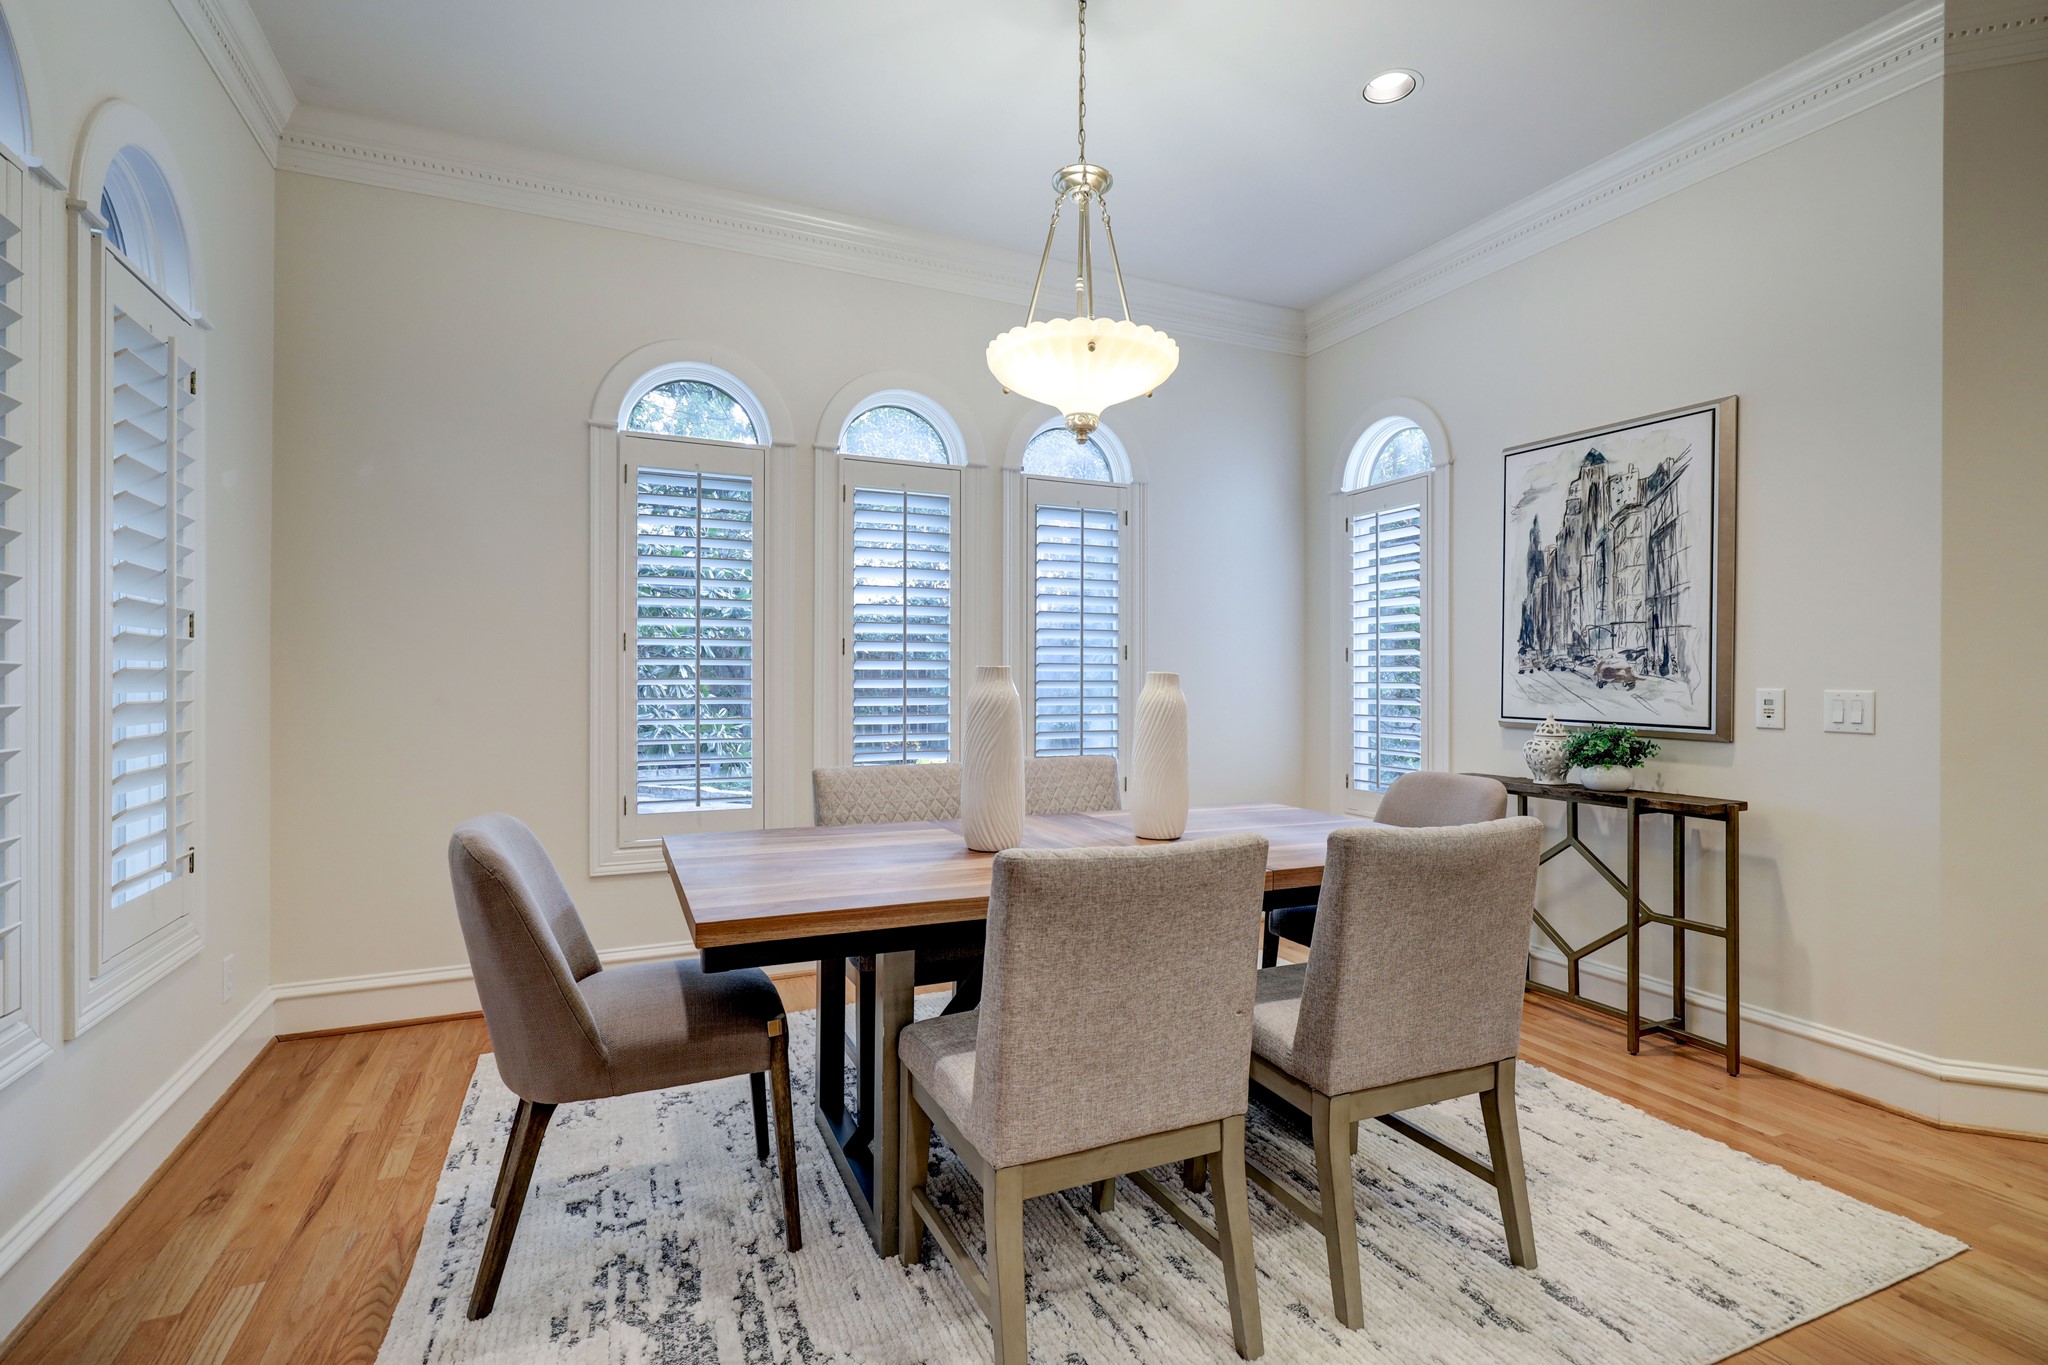 Immediately adjoining the kitchen is this handsome breakfast area for informal dining.  Like much of the home, it has beautiful views of the front garden area.